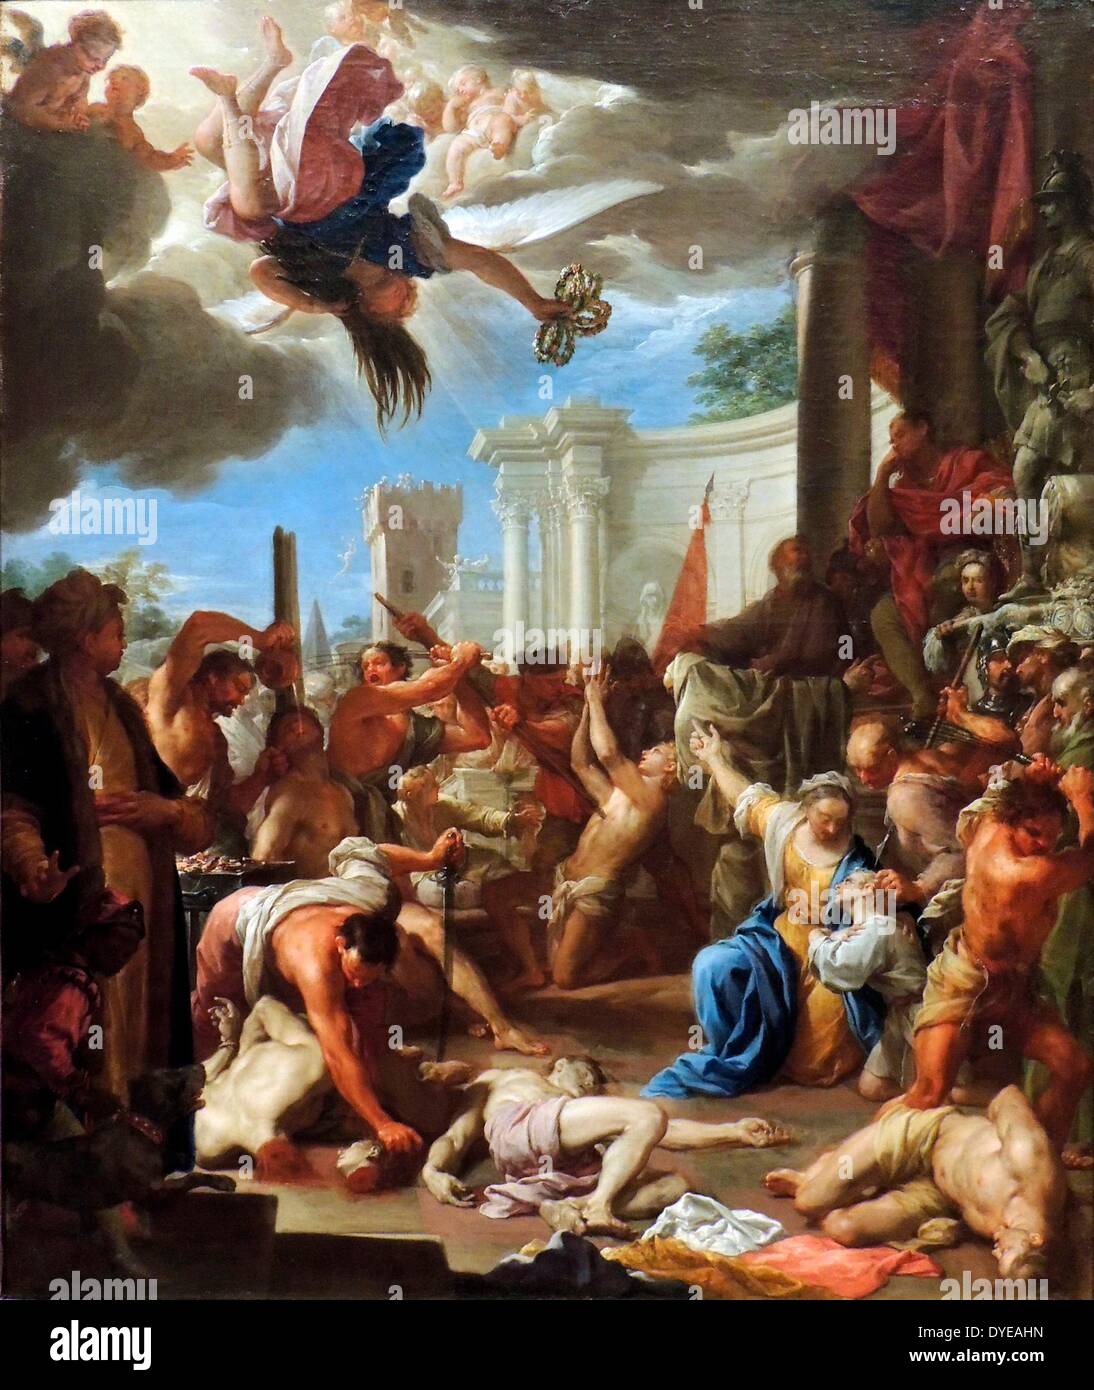 The Martyrdom of the Seven Sons of Saint Felicity by Francesco Trevisani (1656-1746) oil on canvas, 1709. The most prominent cardinal in Rome ordered this painting as a gift for a French minister and his wife, whose name, Catherine Felicite, inspired the choice of subject. The Christian martyr Saint Felicity - here in a yellow gown - was forced to witness the martyrdom of her seven sons before herself being beheaded. Trevisani included two self-portraits; as the standing man at the left, and as the man looking out at us from behind the statue at right. Stock Photo